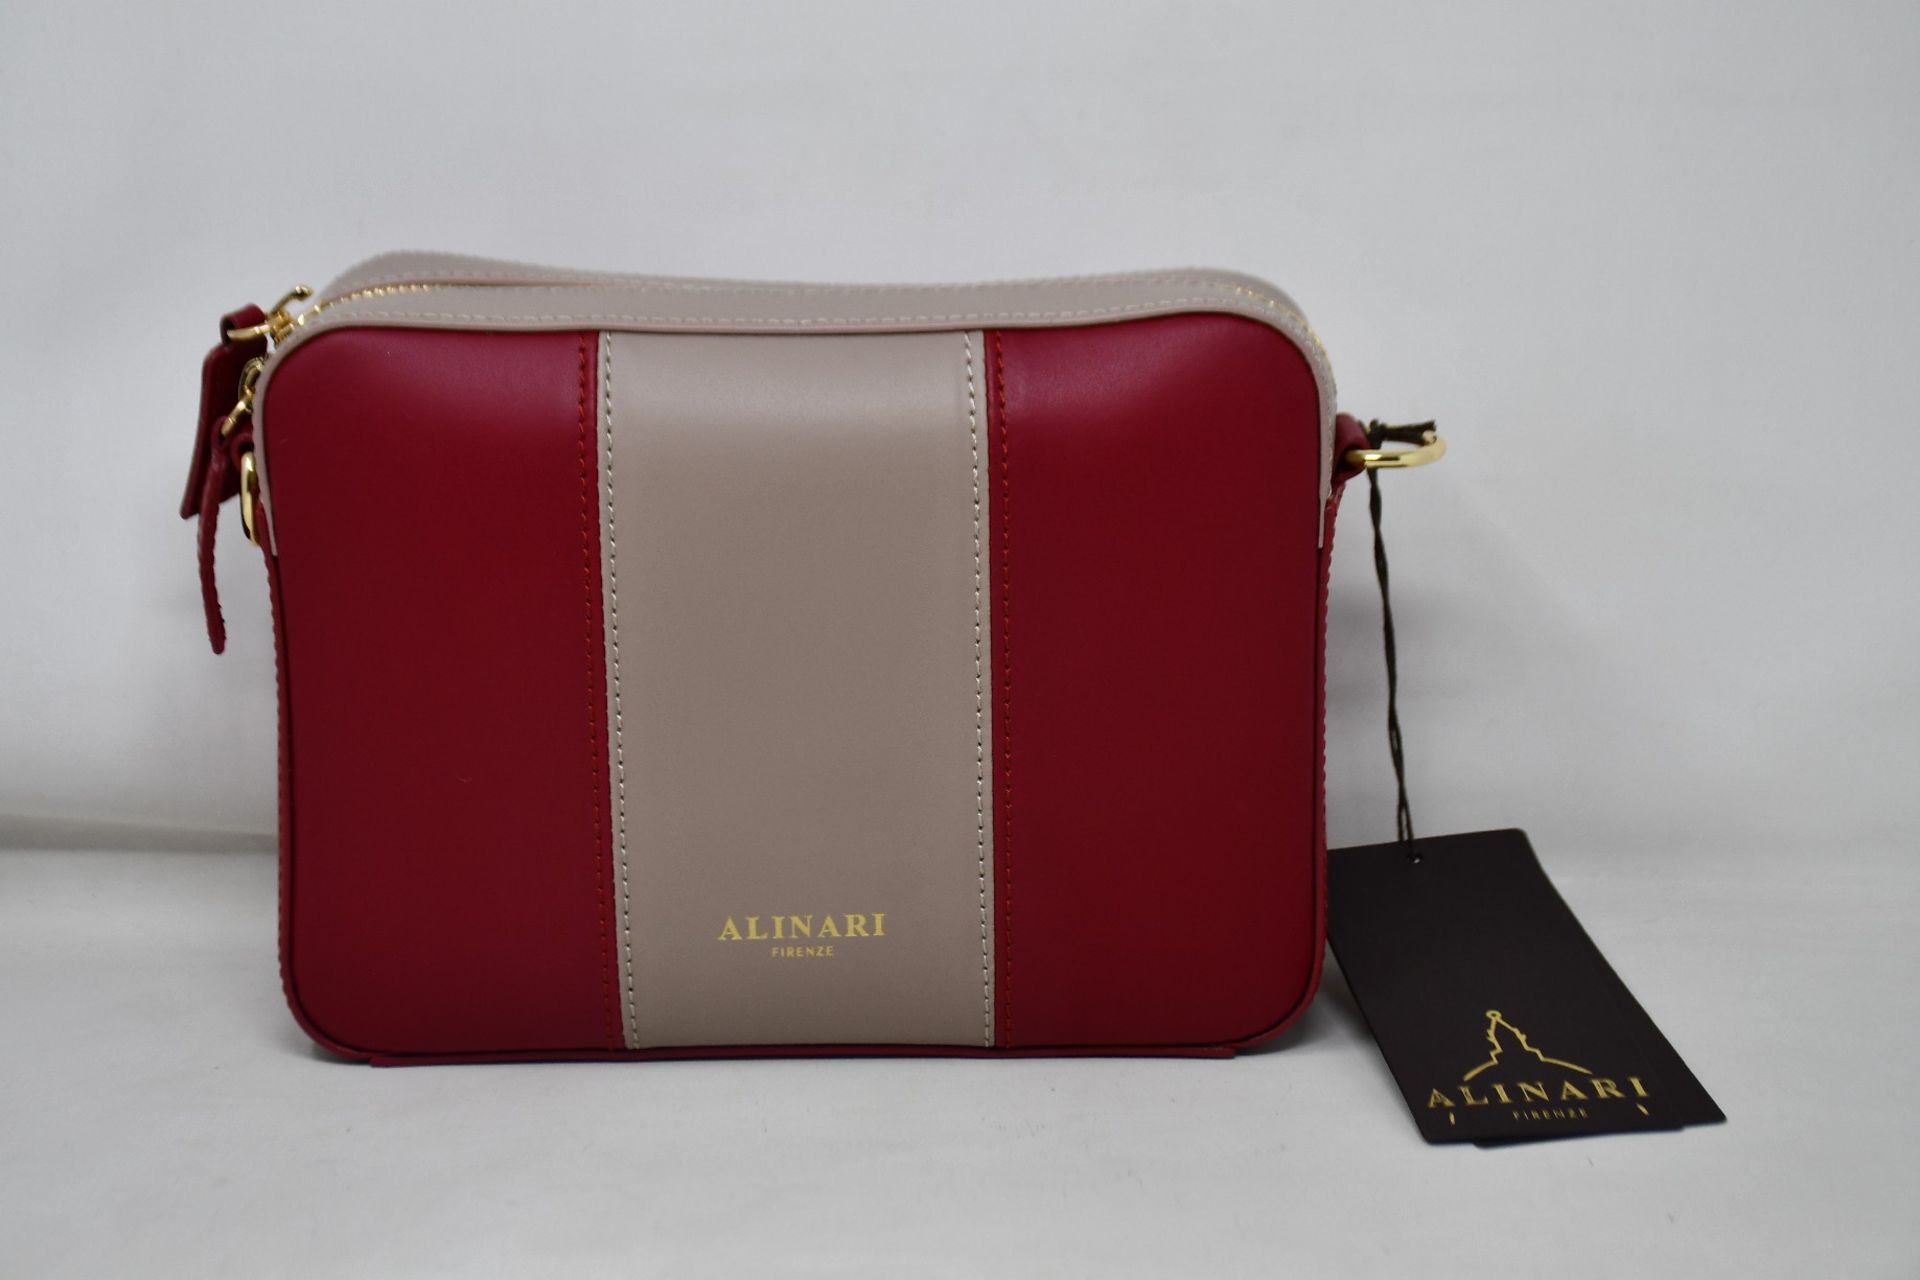 An as new Alinari Firenze Flavia crossbody bag in red/taupe.